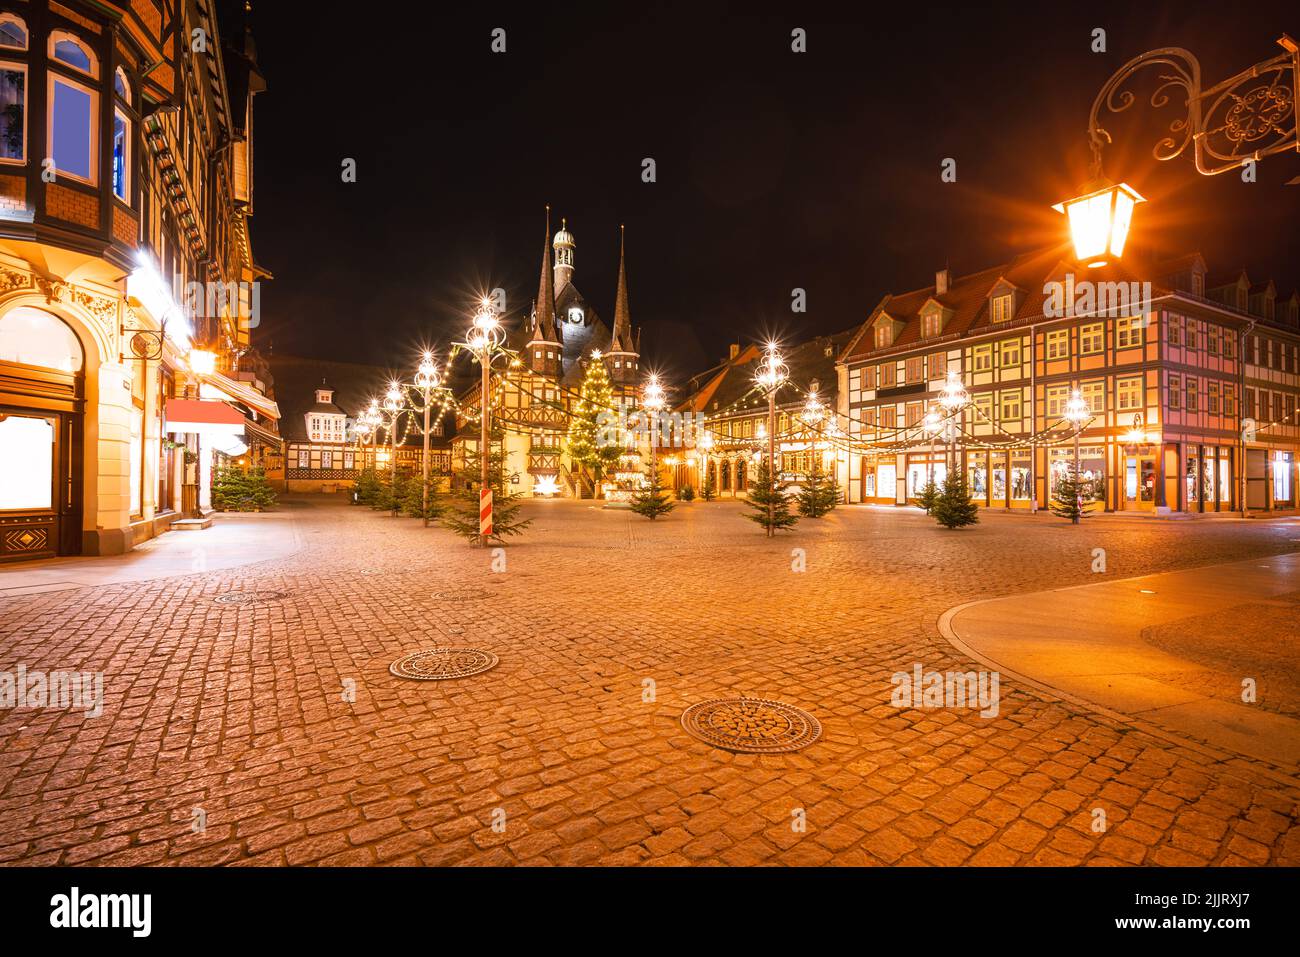 Wernigerode town hall at night with a view of the deserted market square Stock Photo